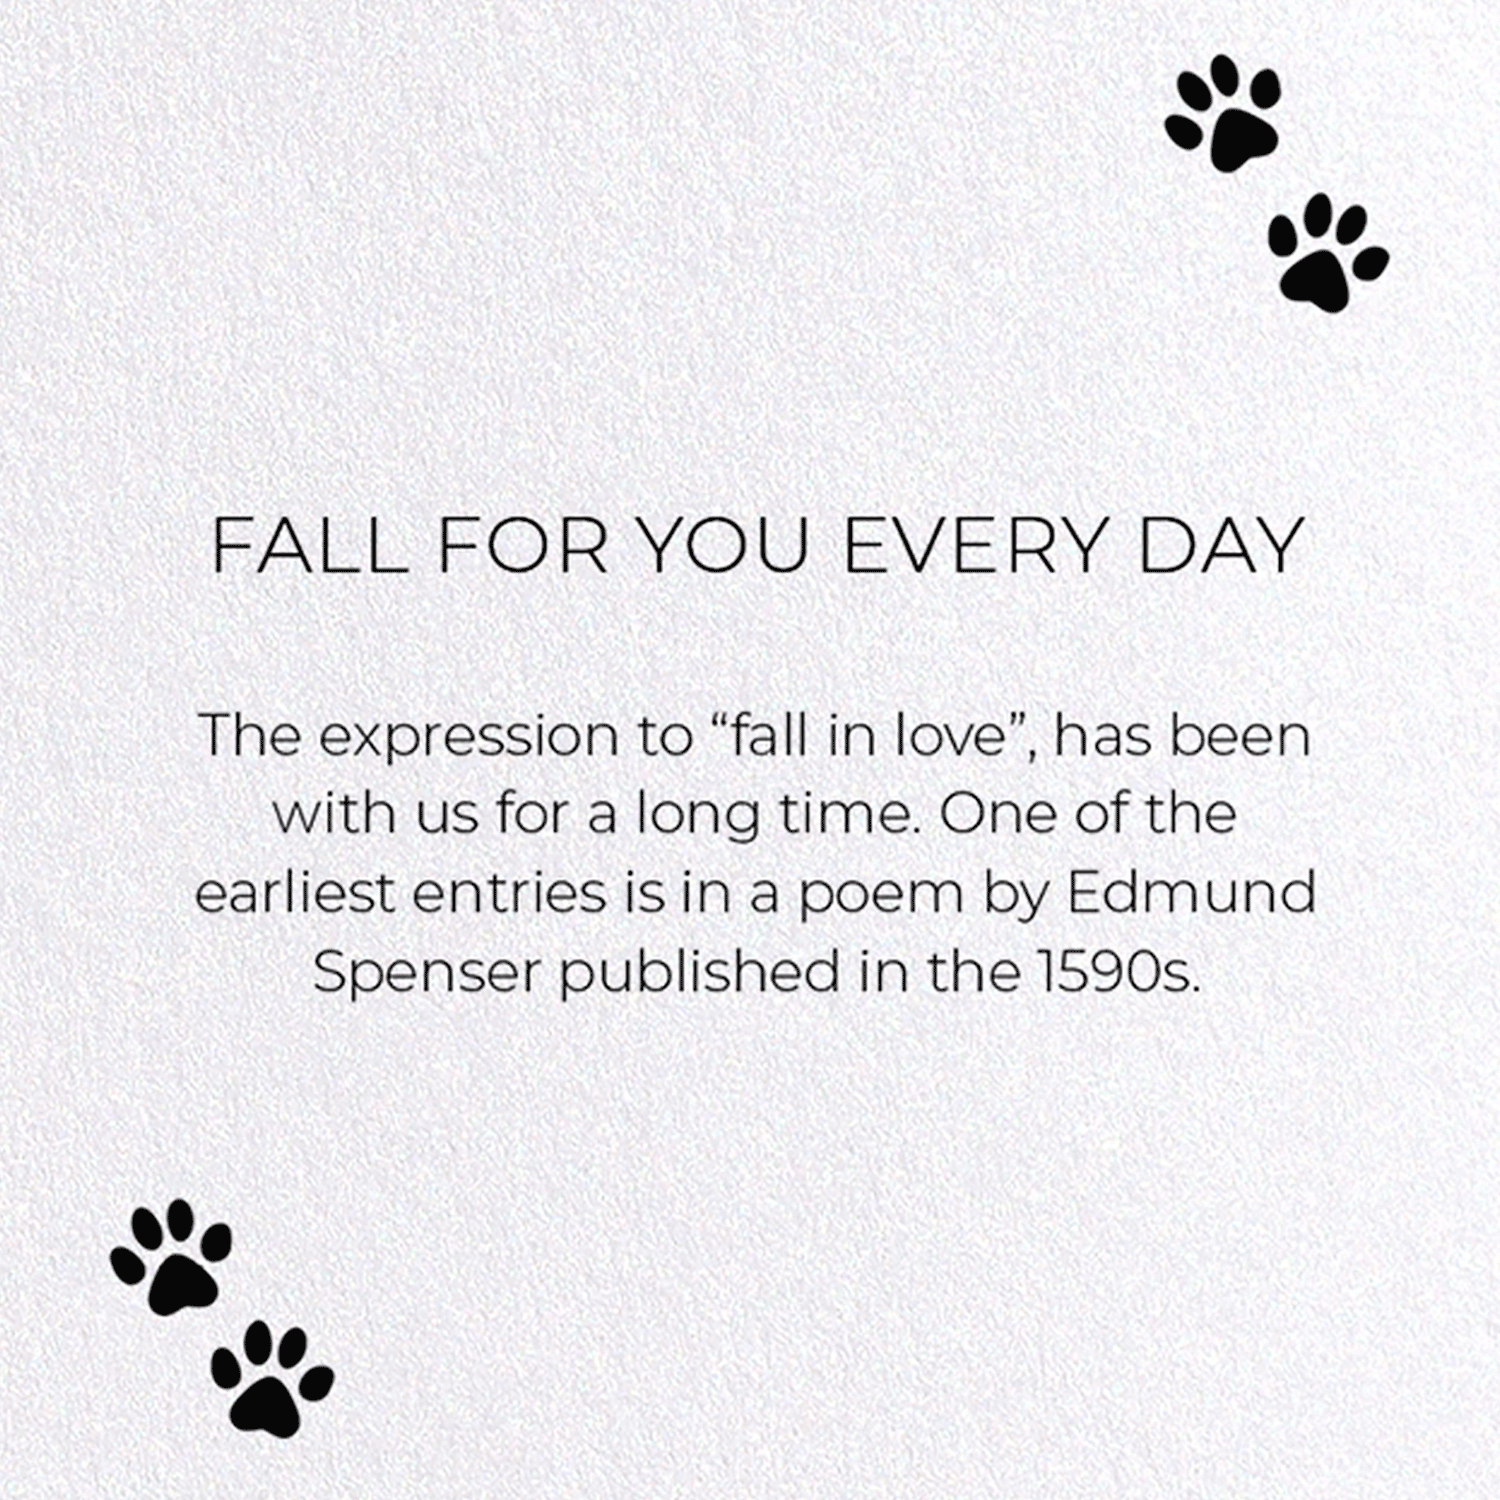 FALL FOR YOU EVERY DAY: Funny Animal Greeting Card